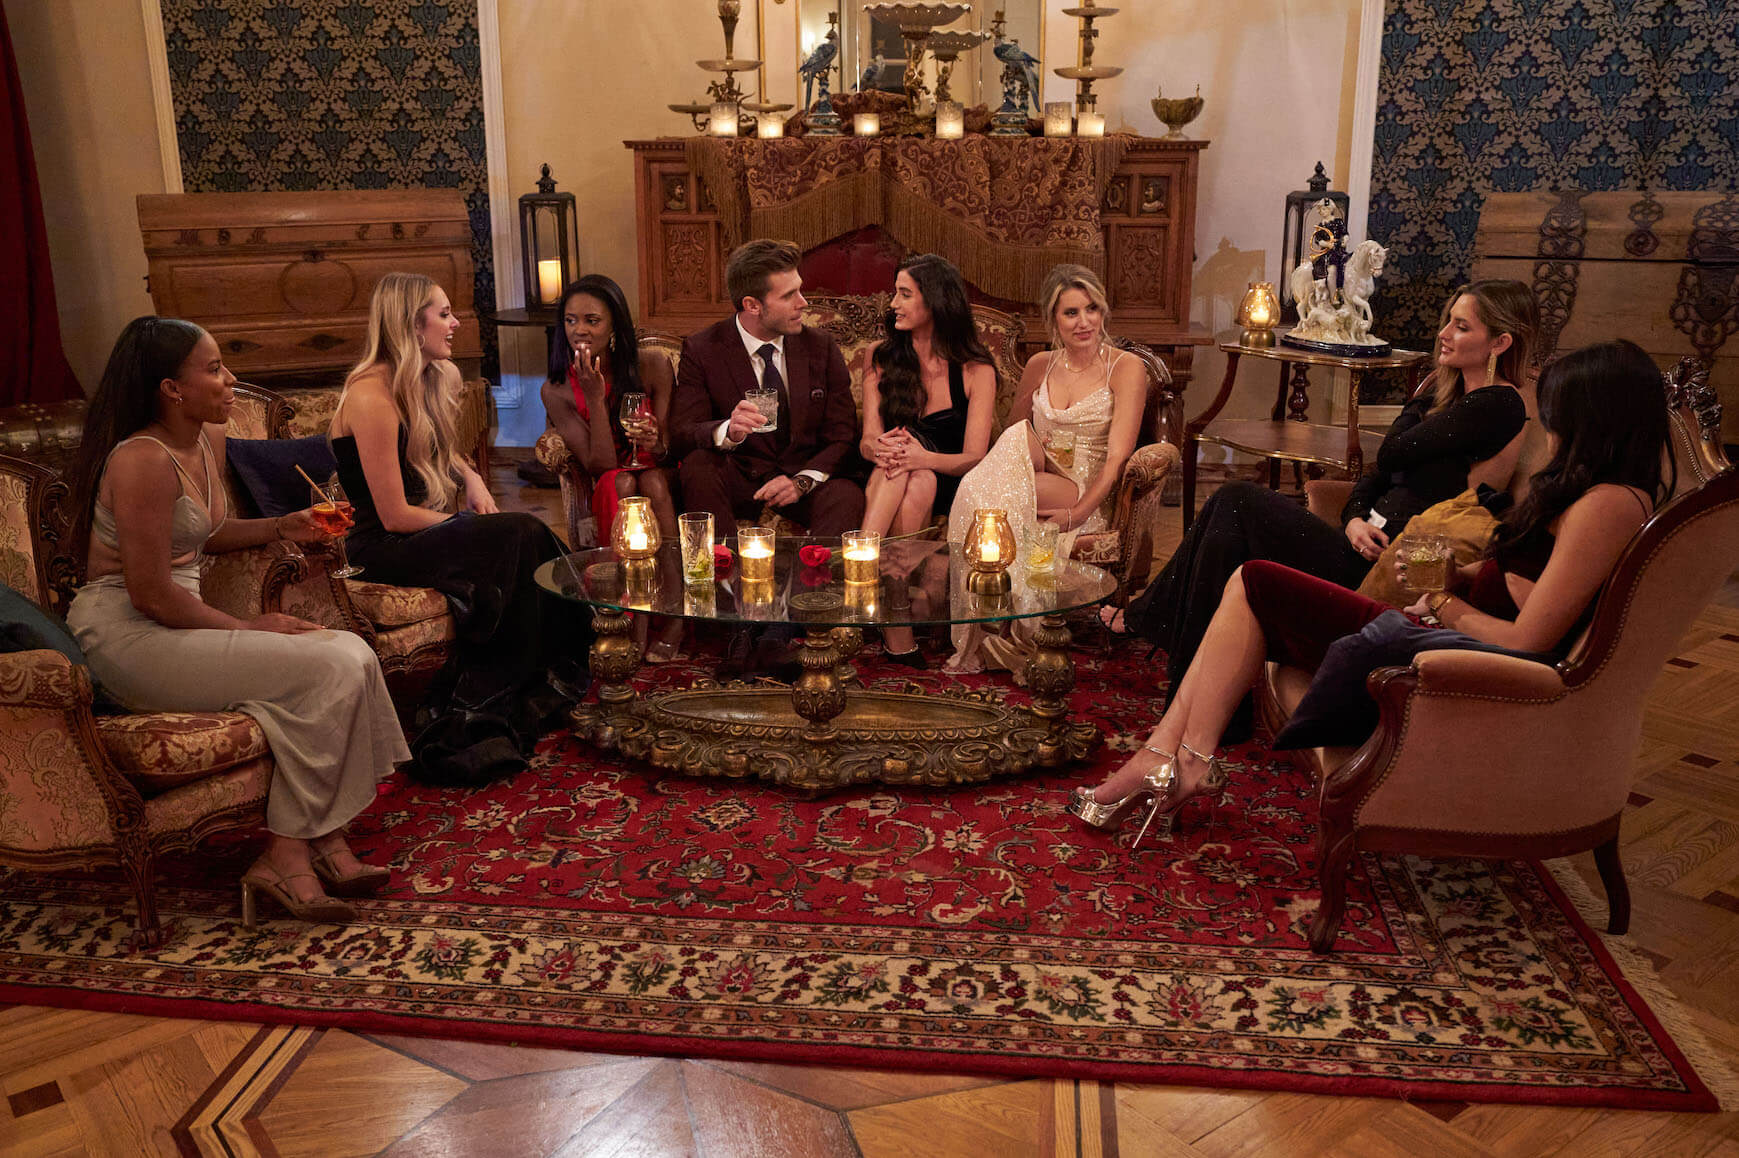 'The Bachelor' Season 27 cast sitting on couches with Zach Shallcross and talking to him